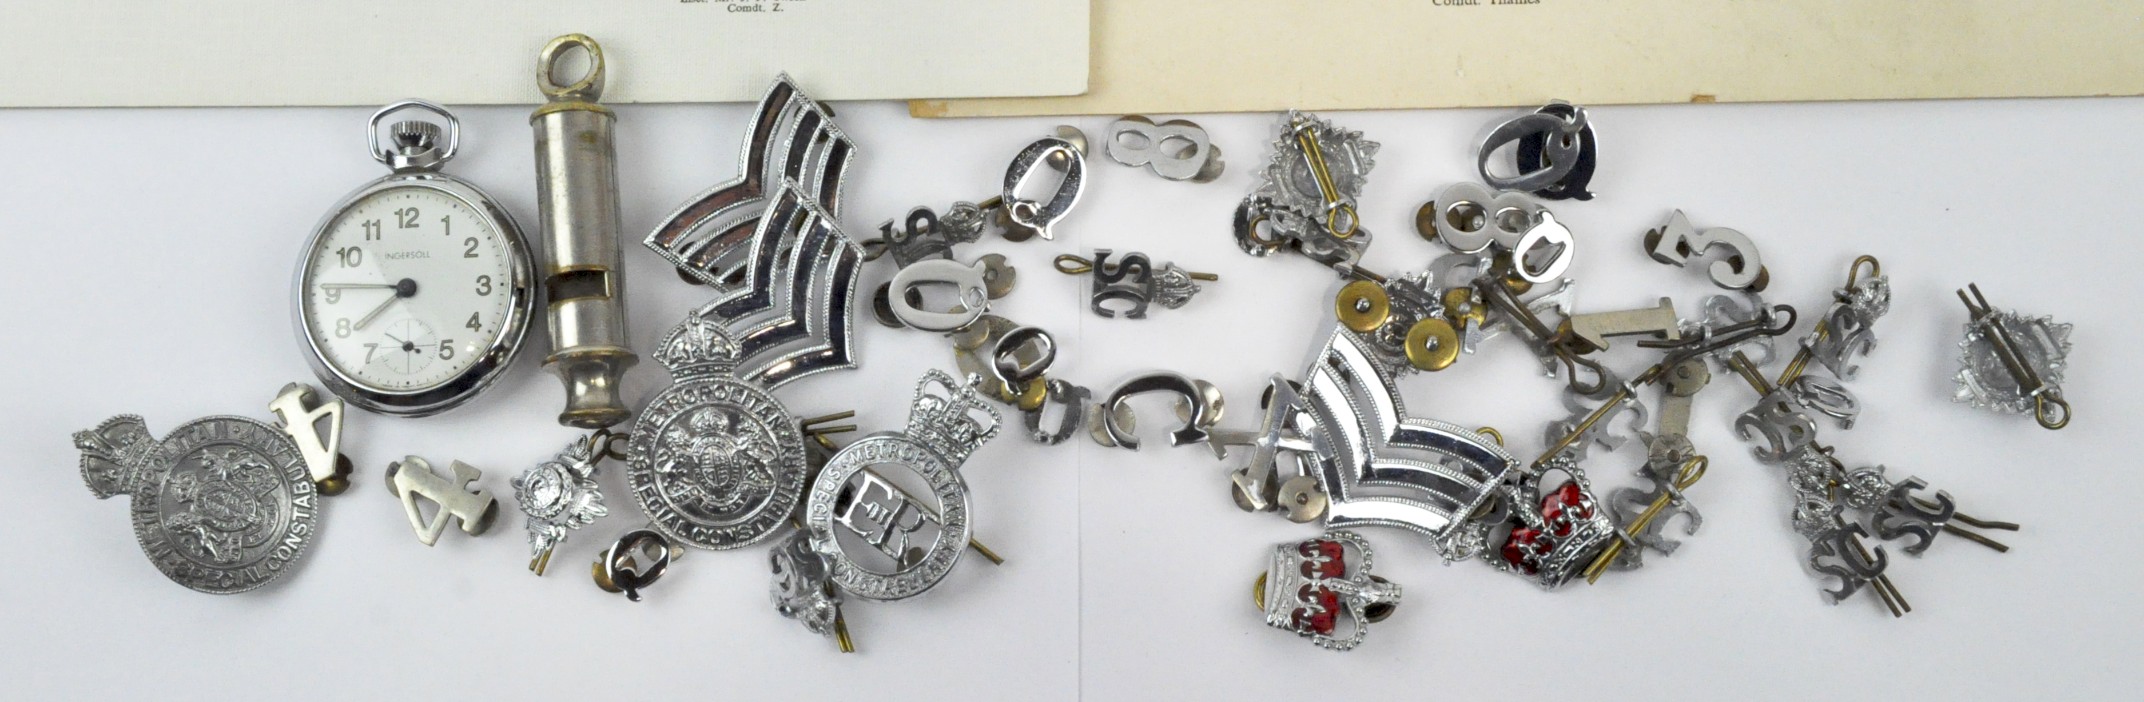 A police insigina photos, cap badges, rank badges and more - Image 2 of 2